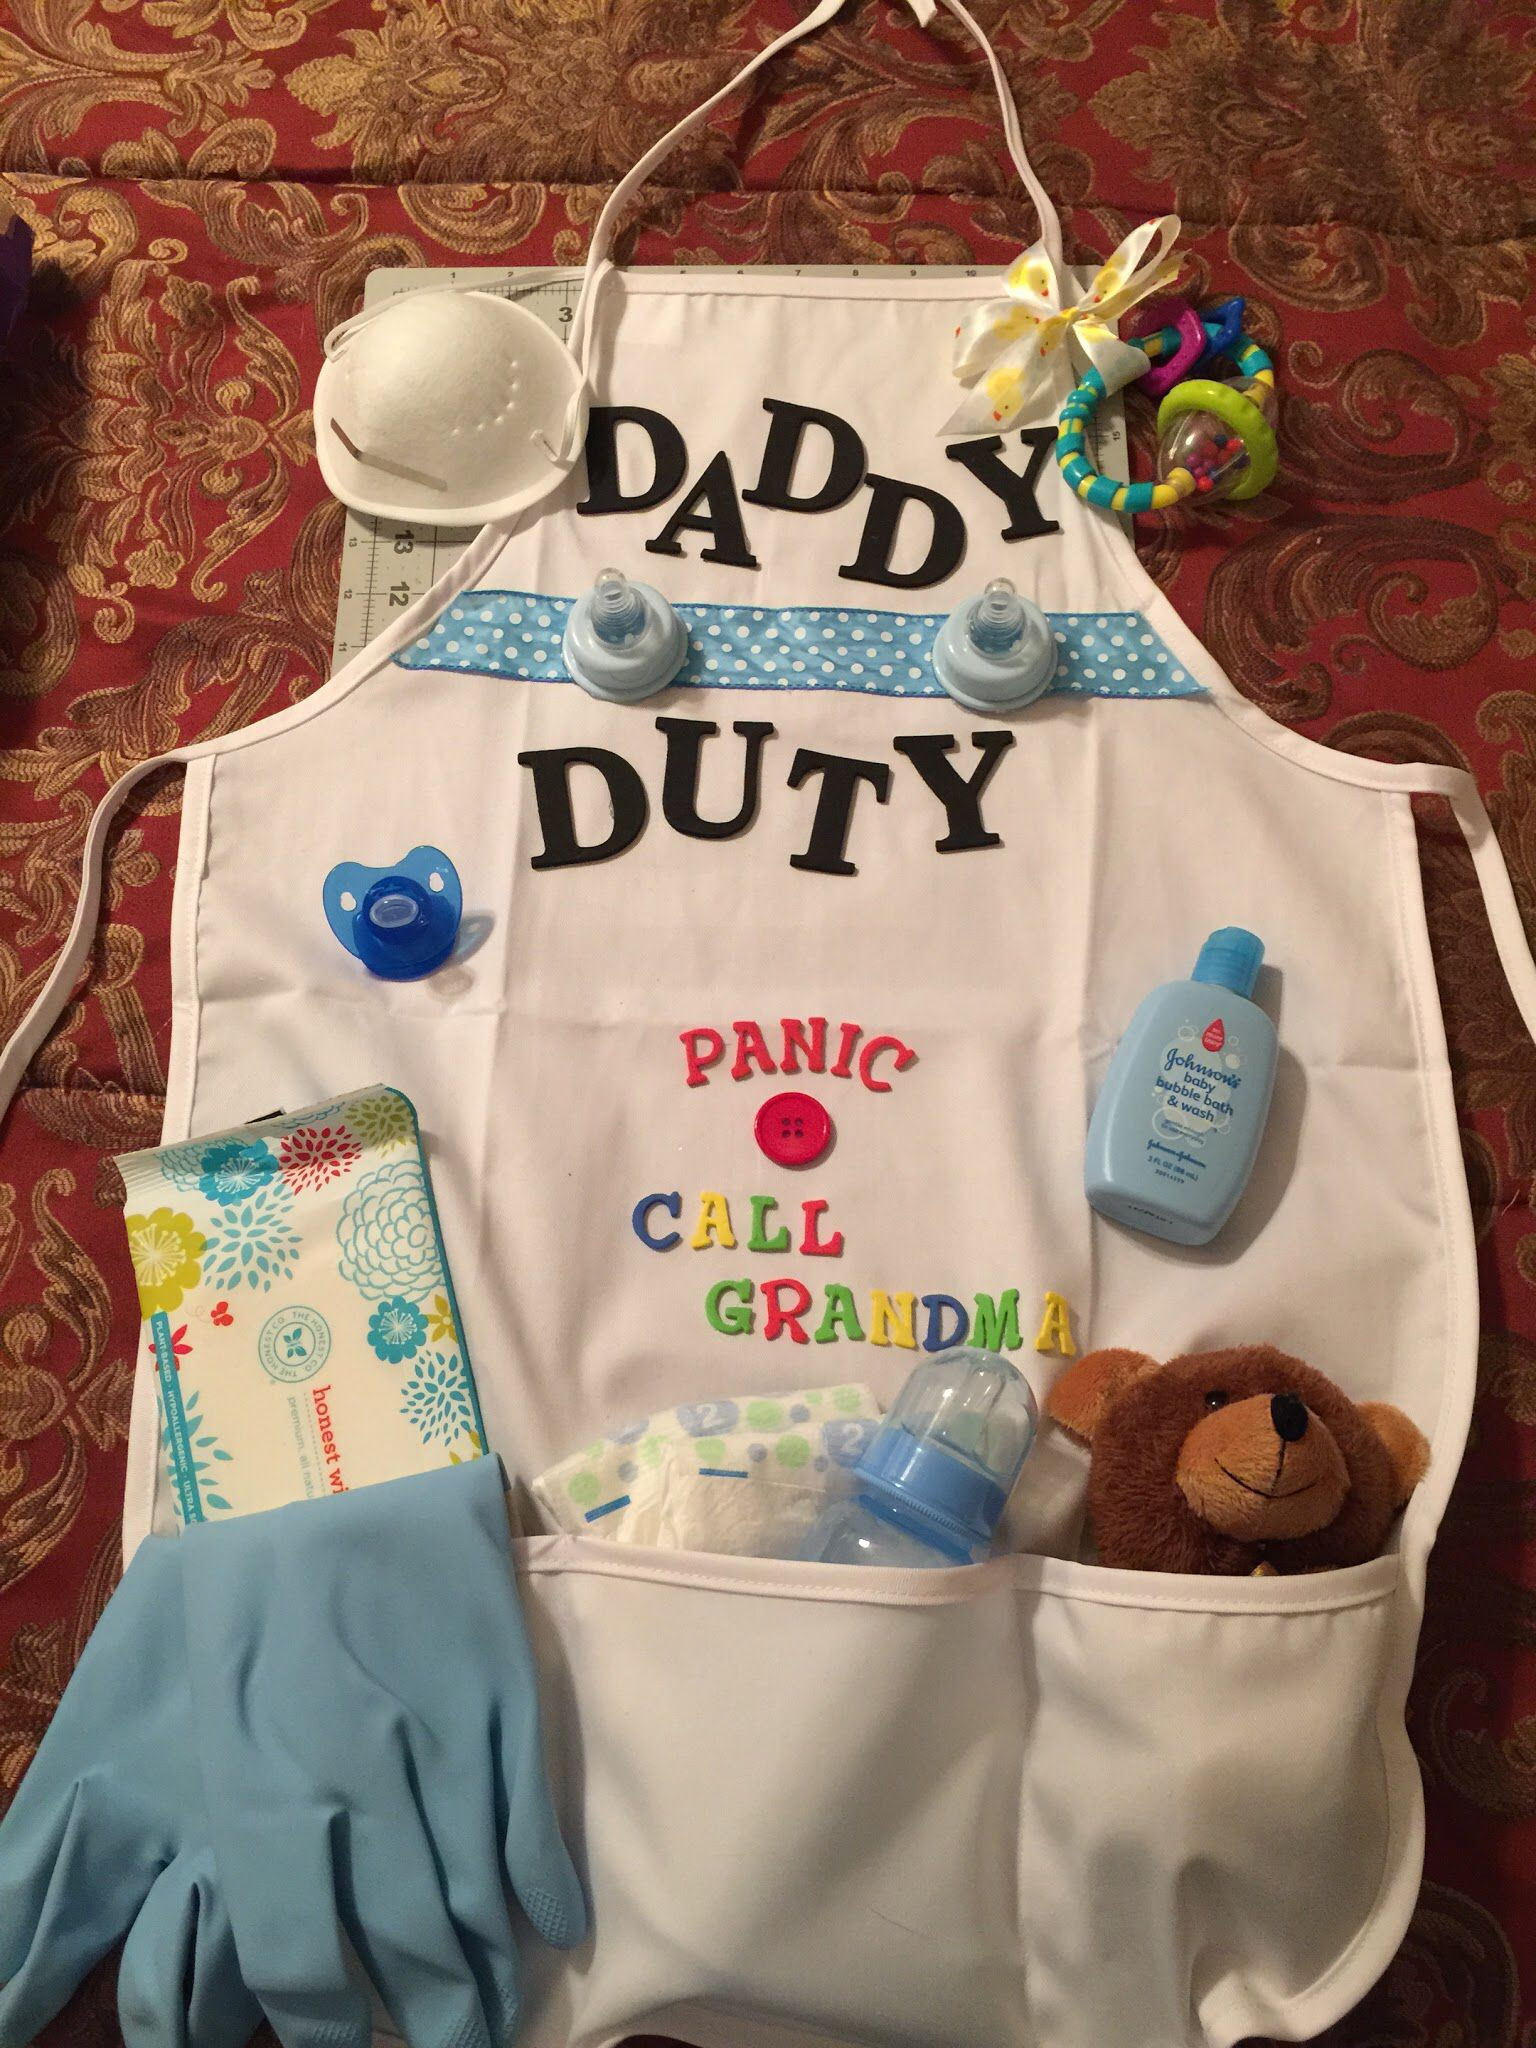 Baby Shower Gift Ideas For Mom And Dad
 New Dad Diaper Duty apron